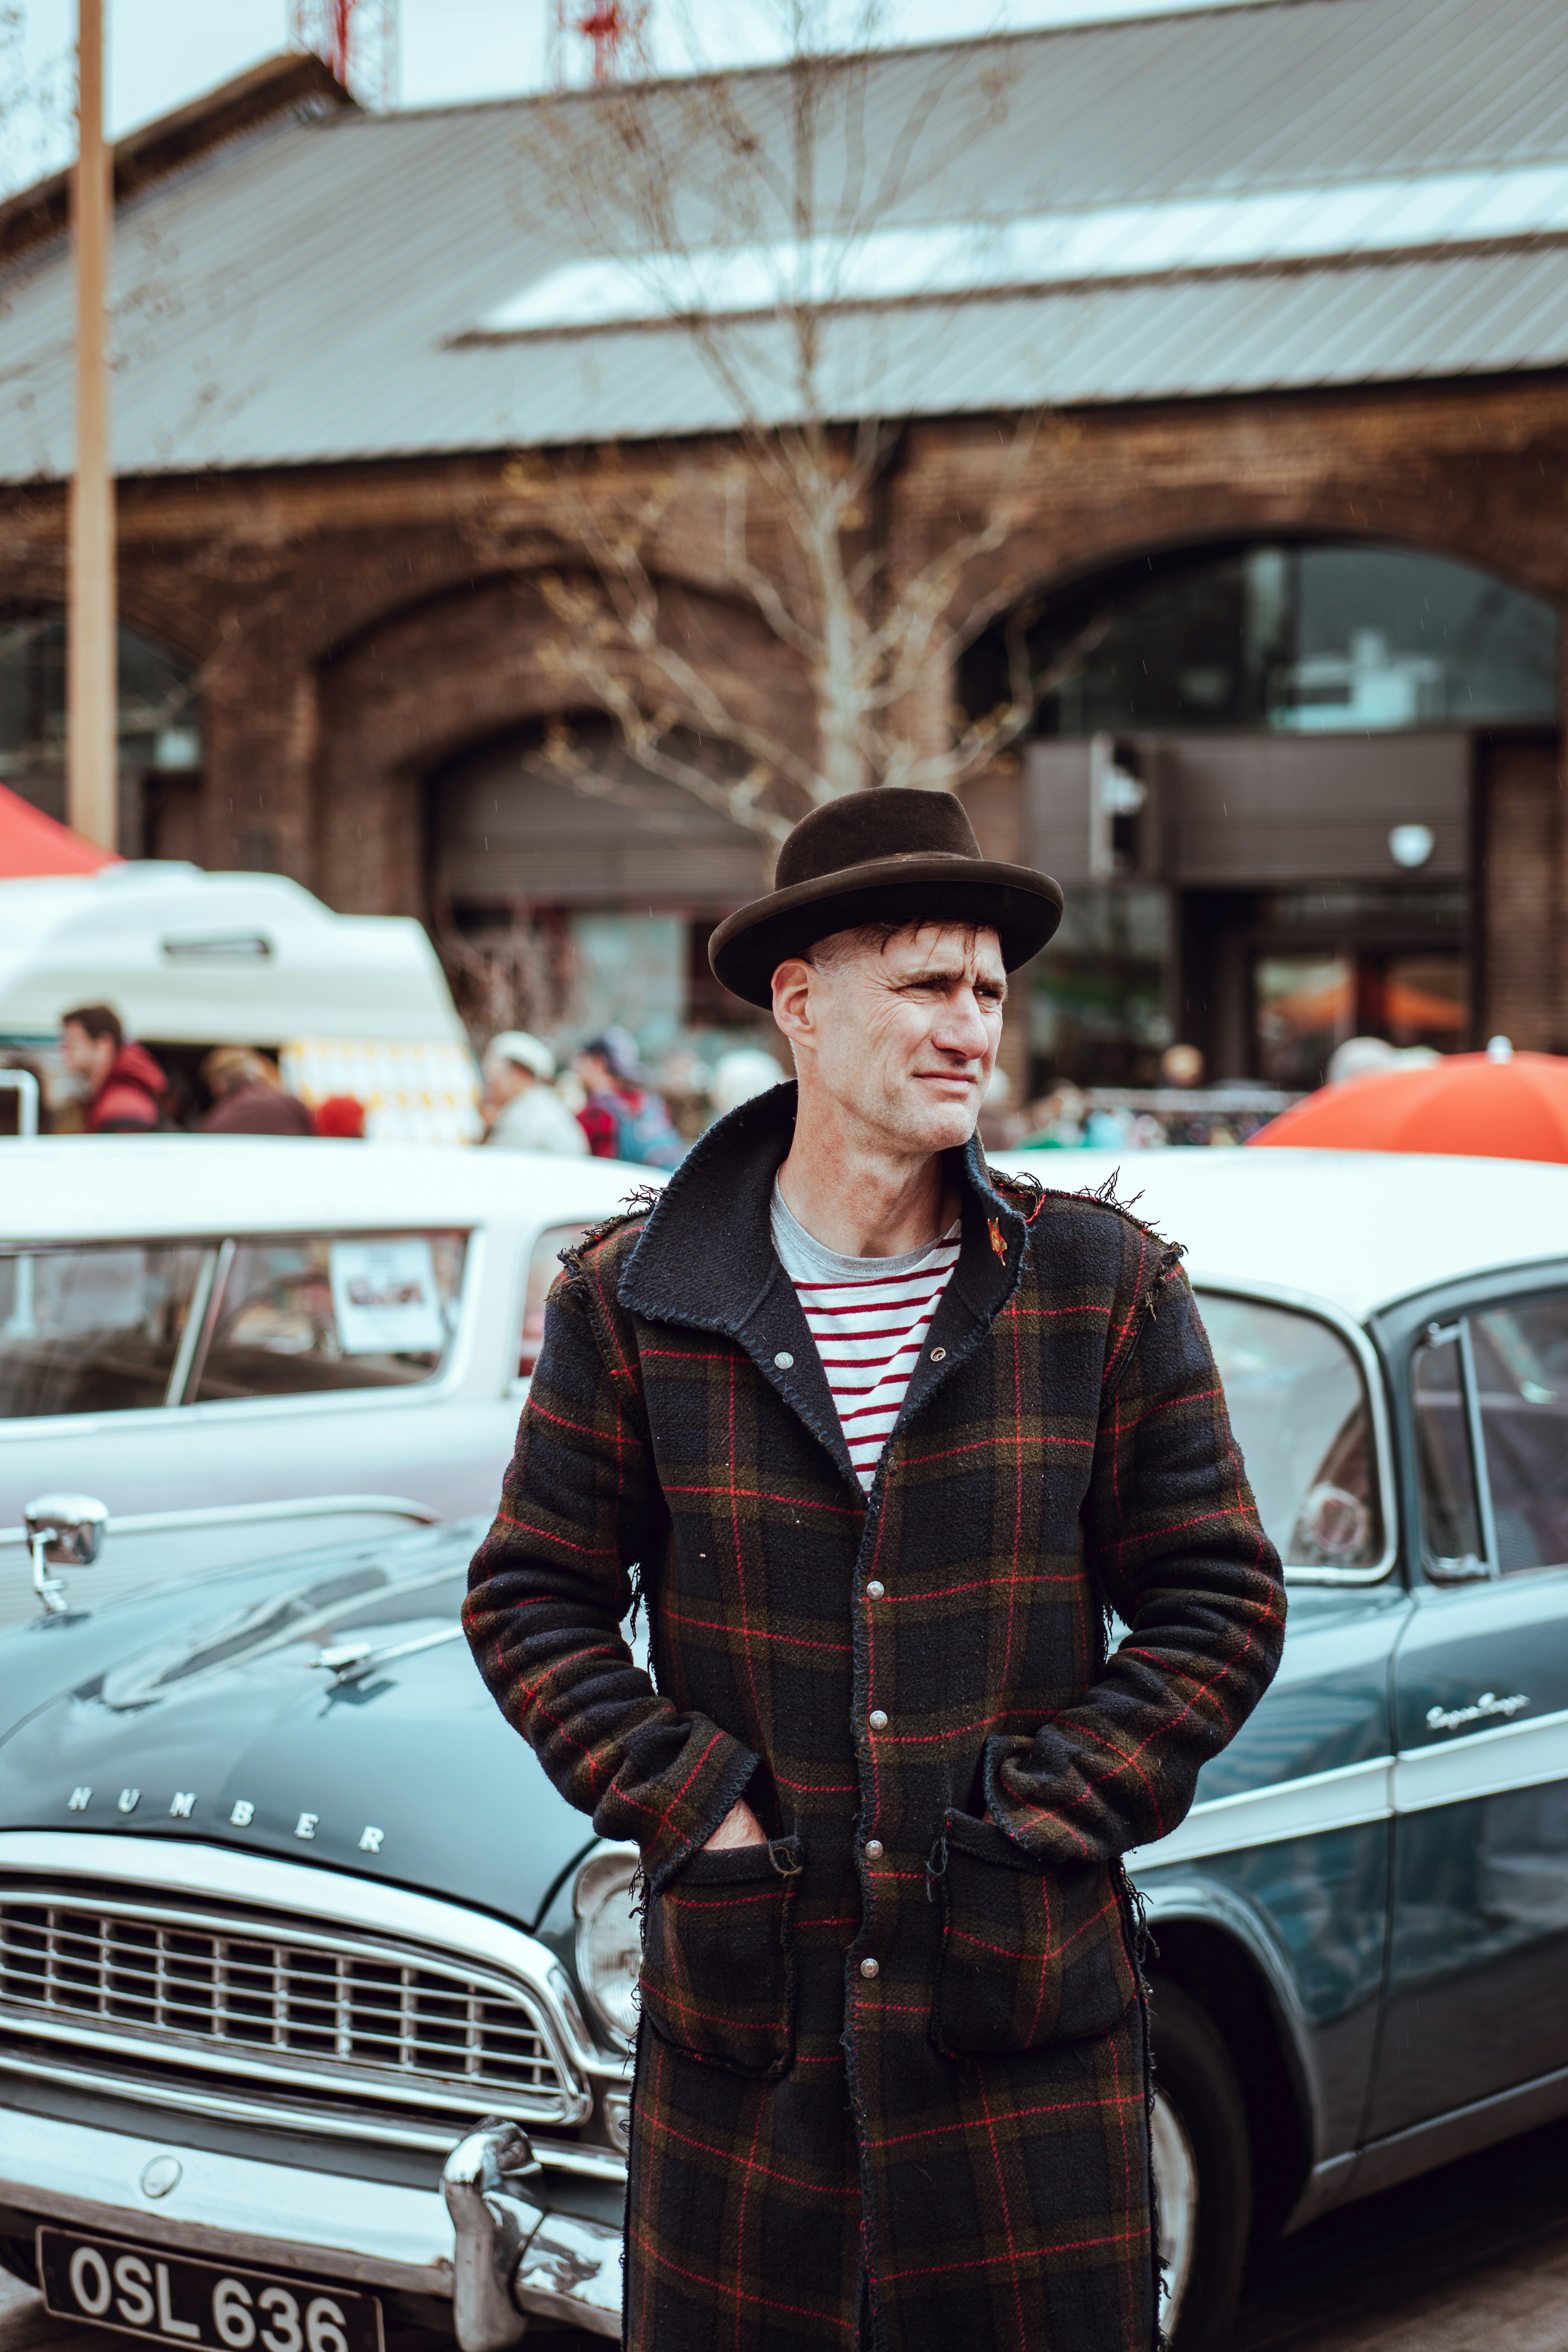 great photo recipe,how to photograph street portrait; man wearing plaid button-up coat in front of classic car